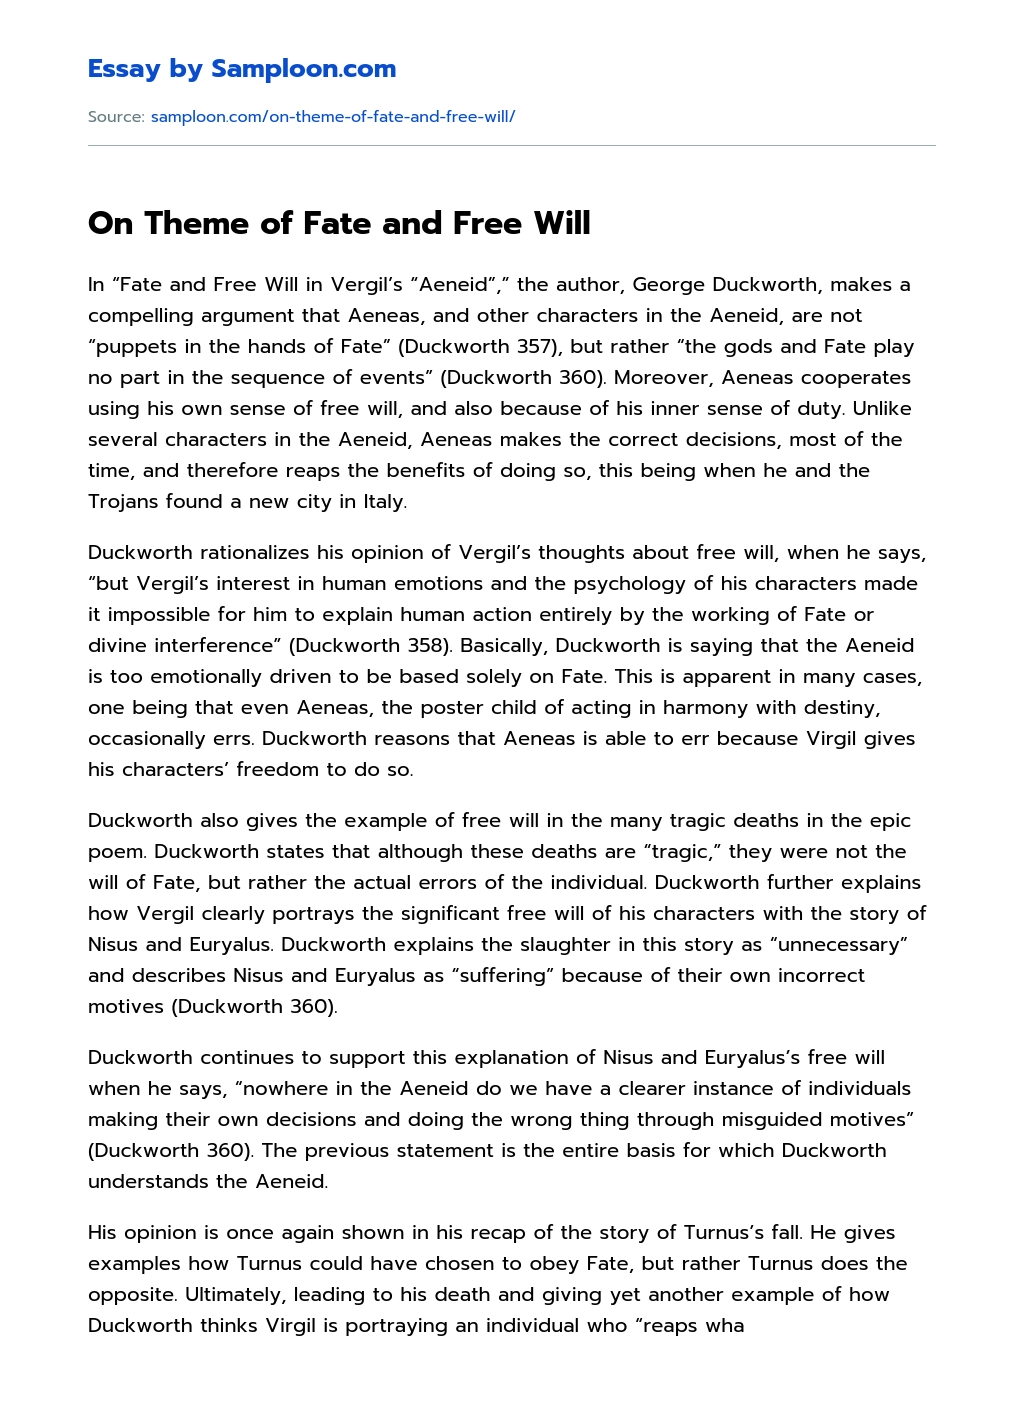 On Theme of Fate and Free Will essay